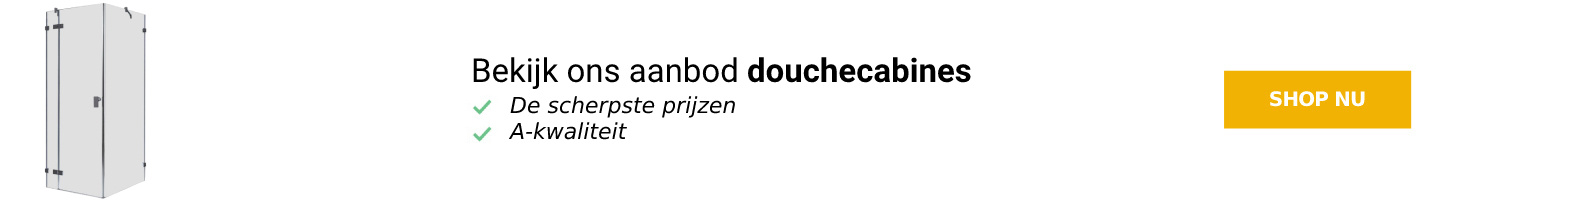 Douchecabine banner